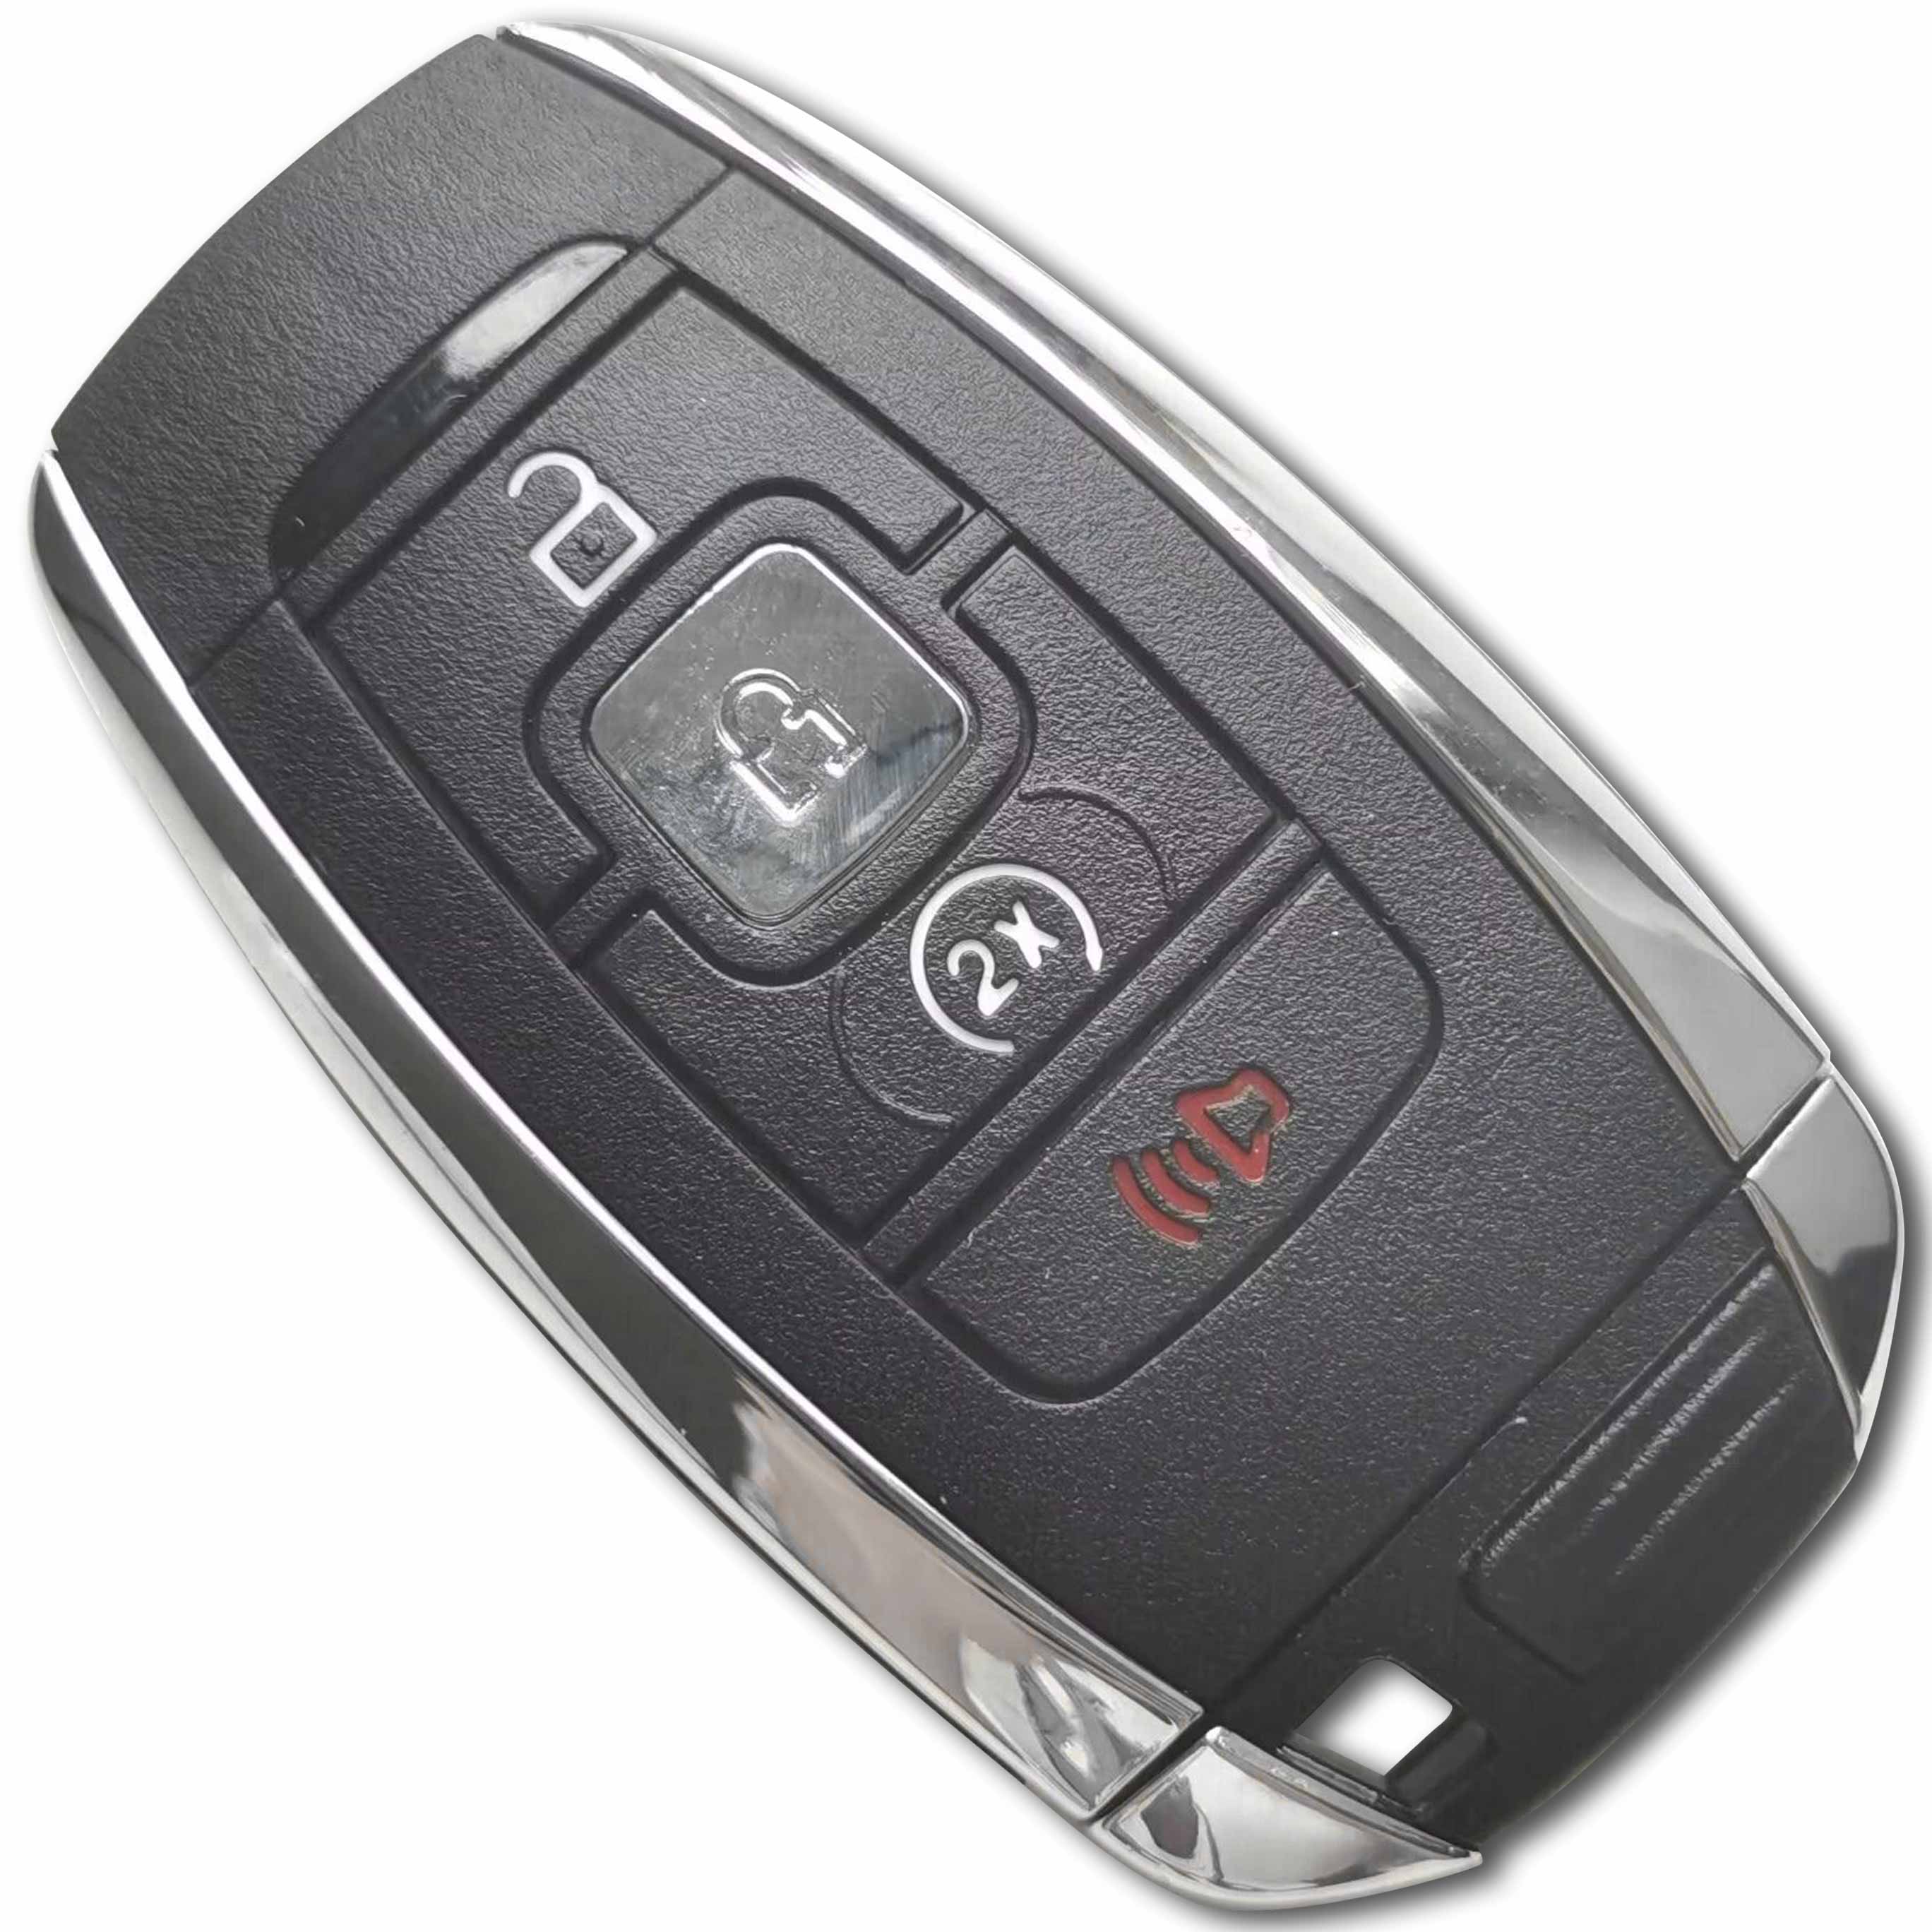 902 MHz M3N-A2C94078000 Smart Key for 2017-2020 Lincoln Continental MKC MKZ Navigator